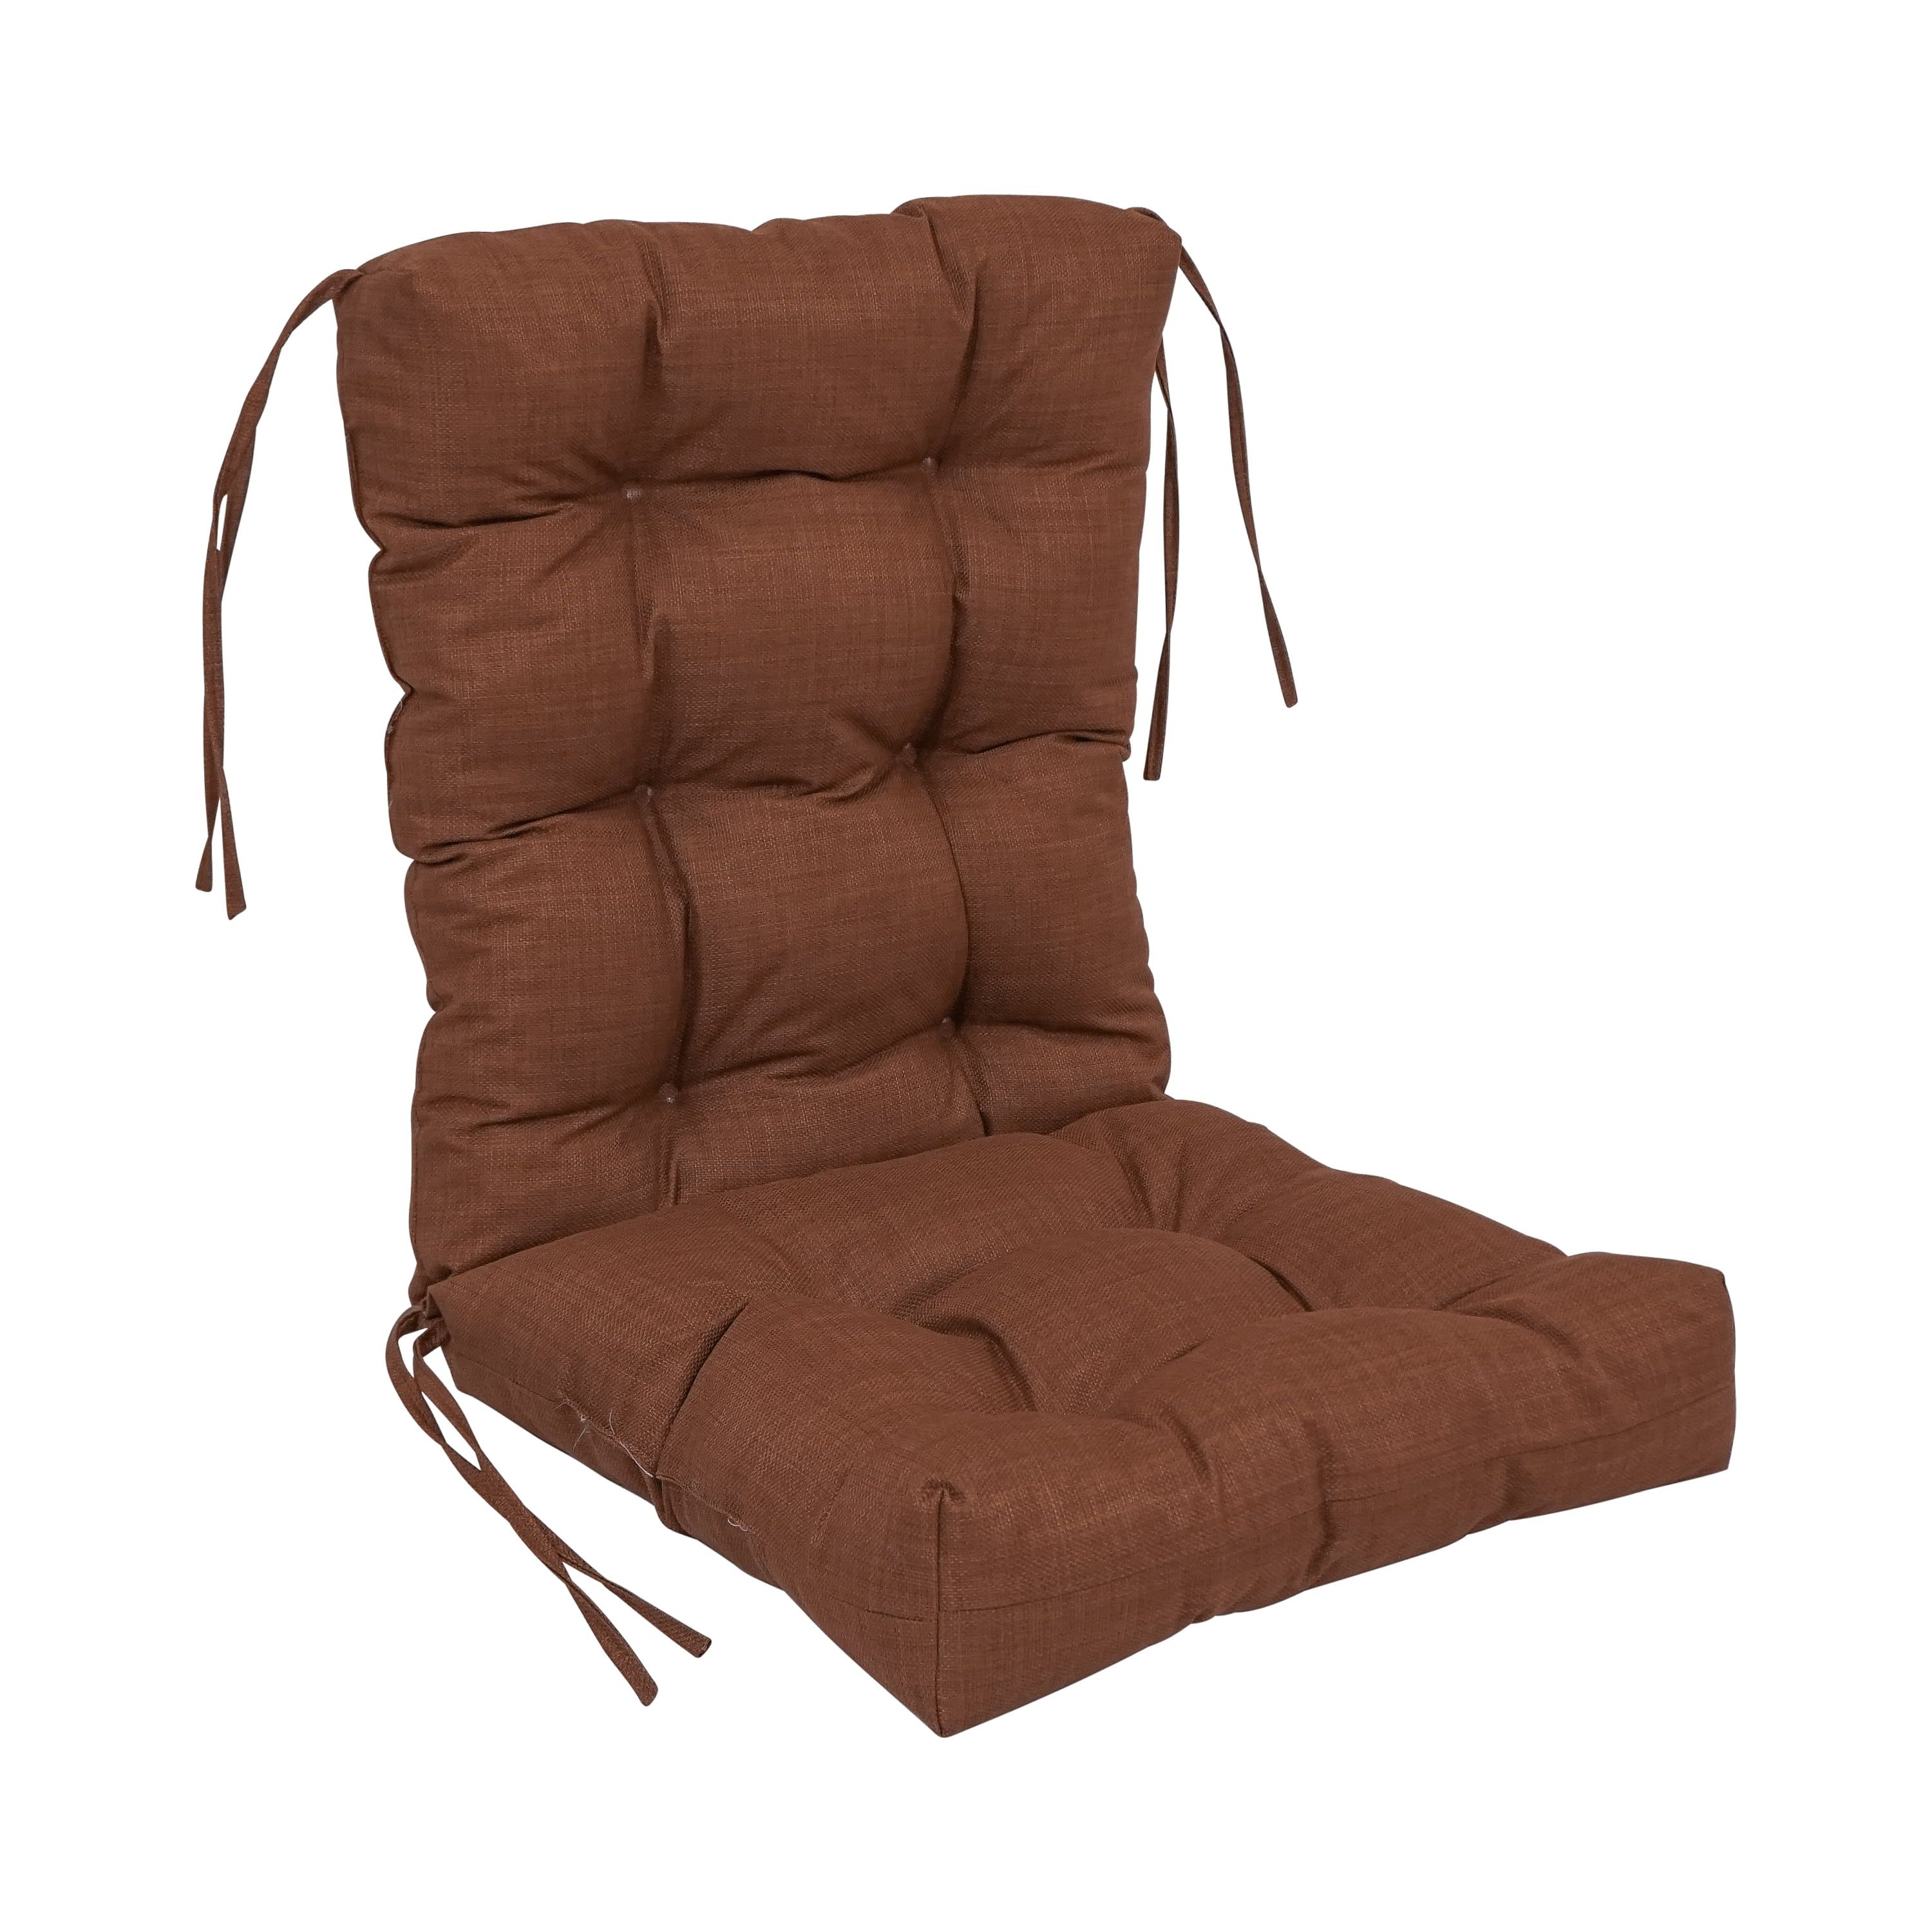 Cocoa Classic Tufted Outdoor Chair Cushion 18" x 38"